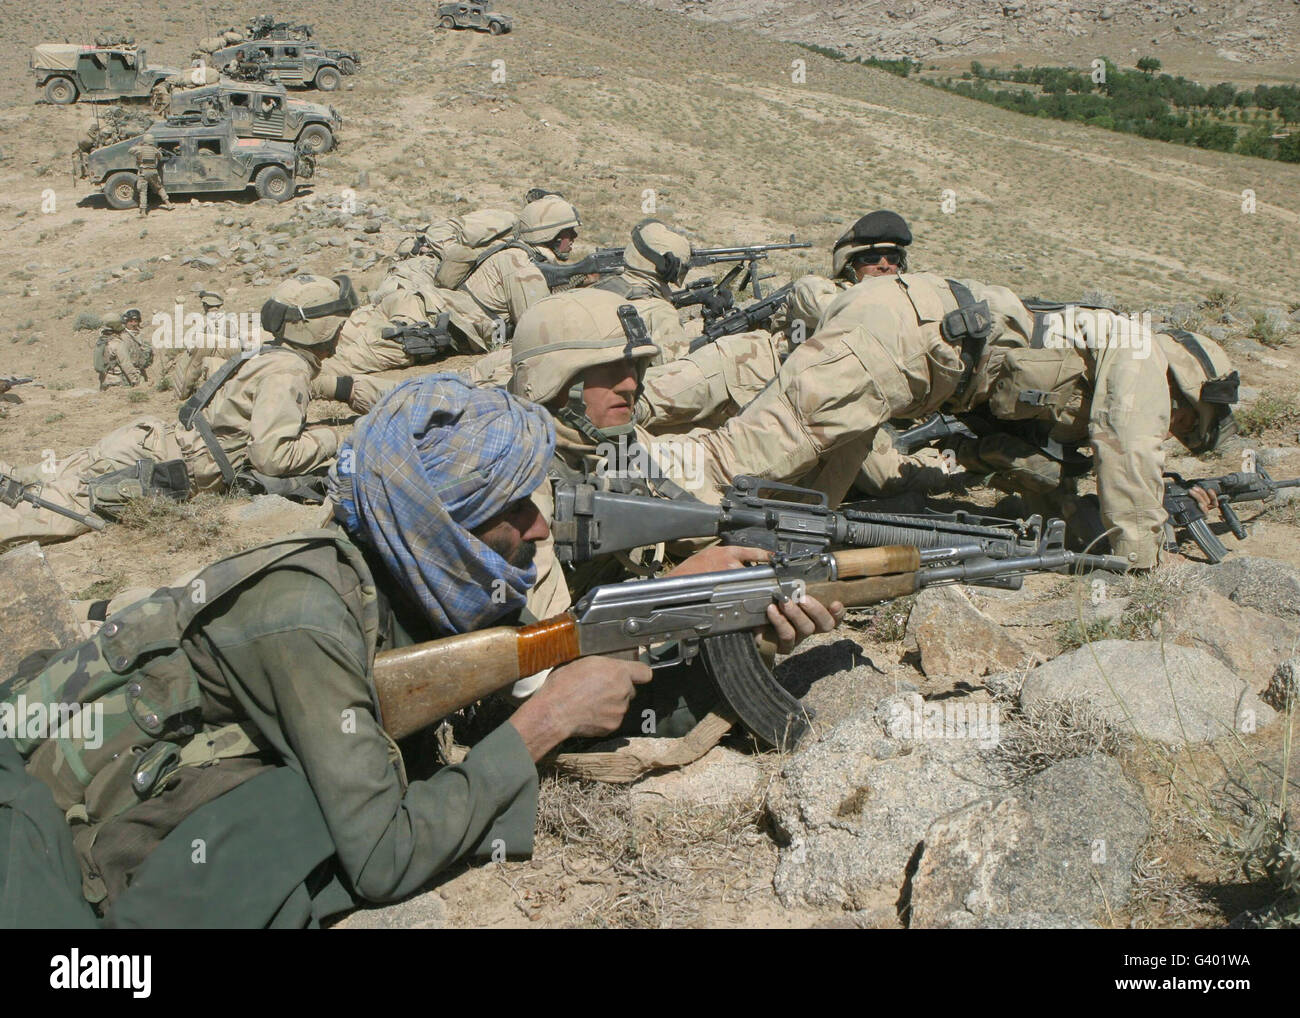 Marines form a skirmish line while under intense enemy fire in Afghanistan. Stock Photo